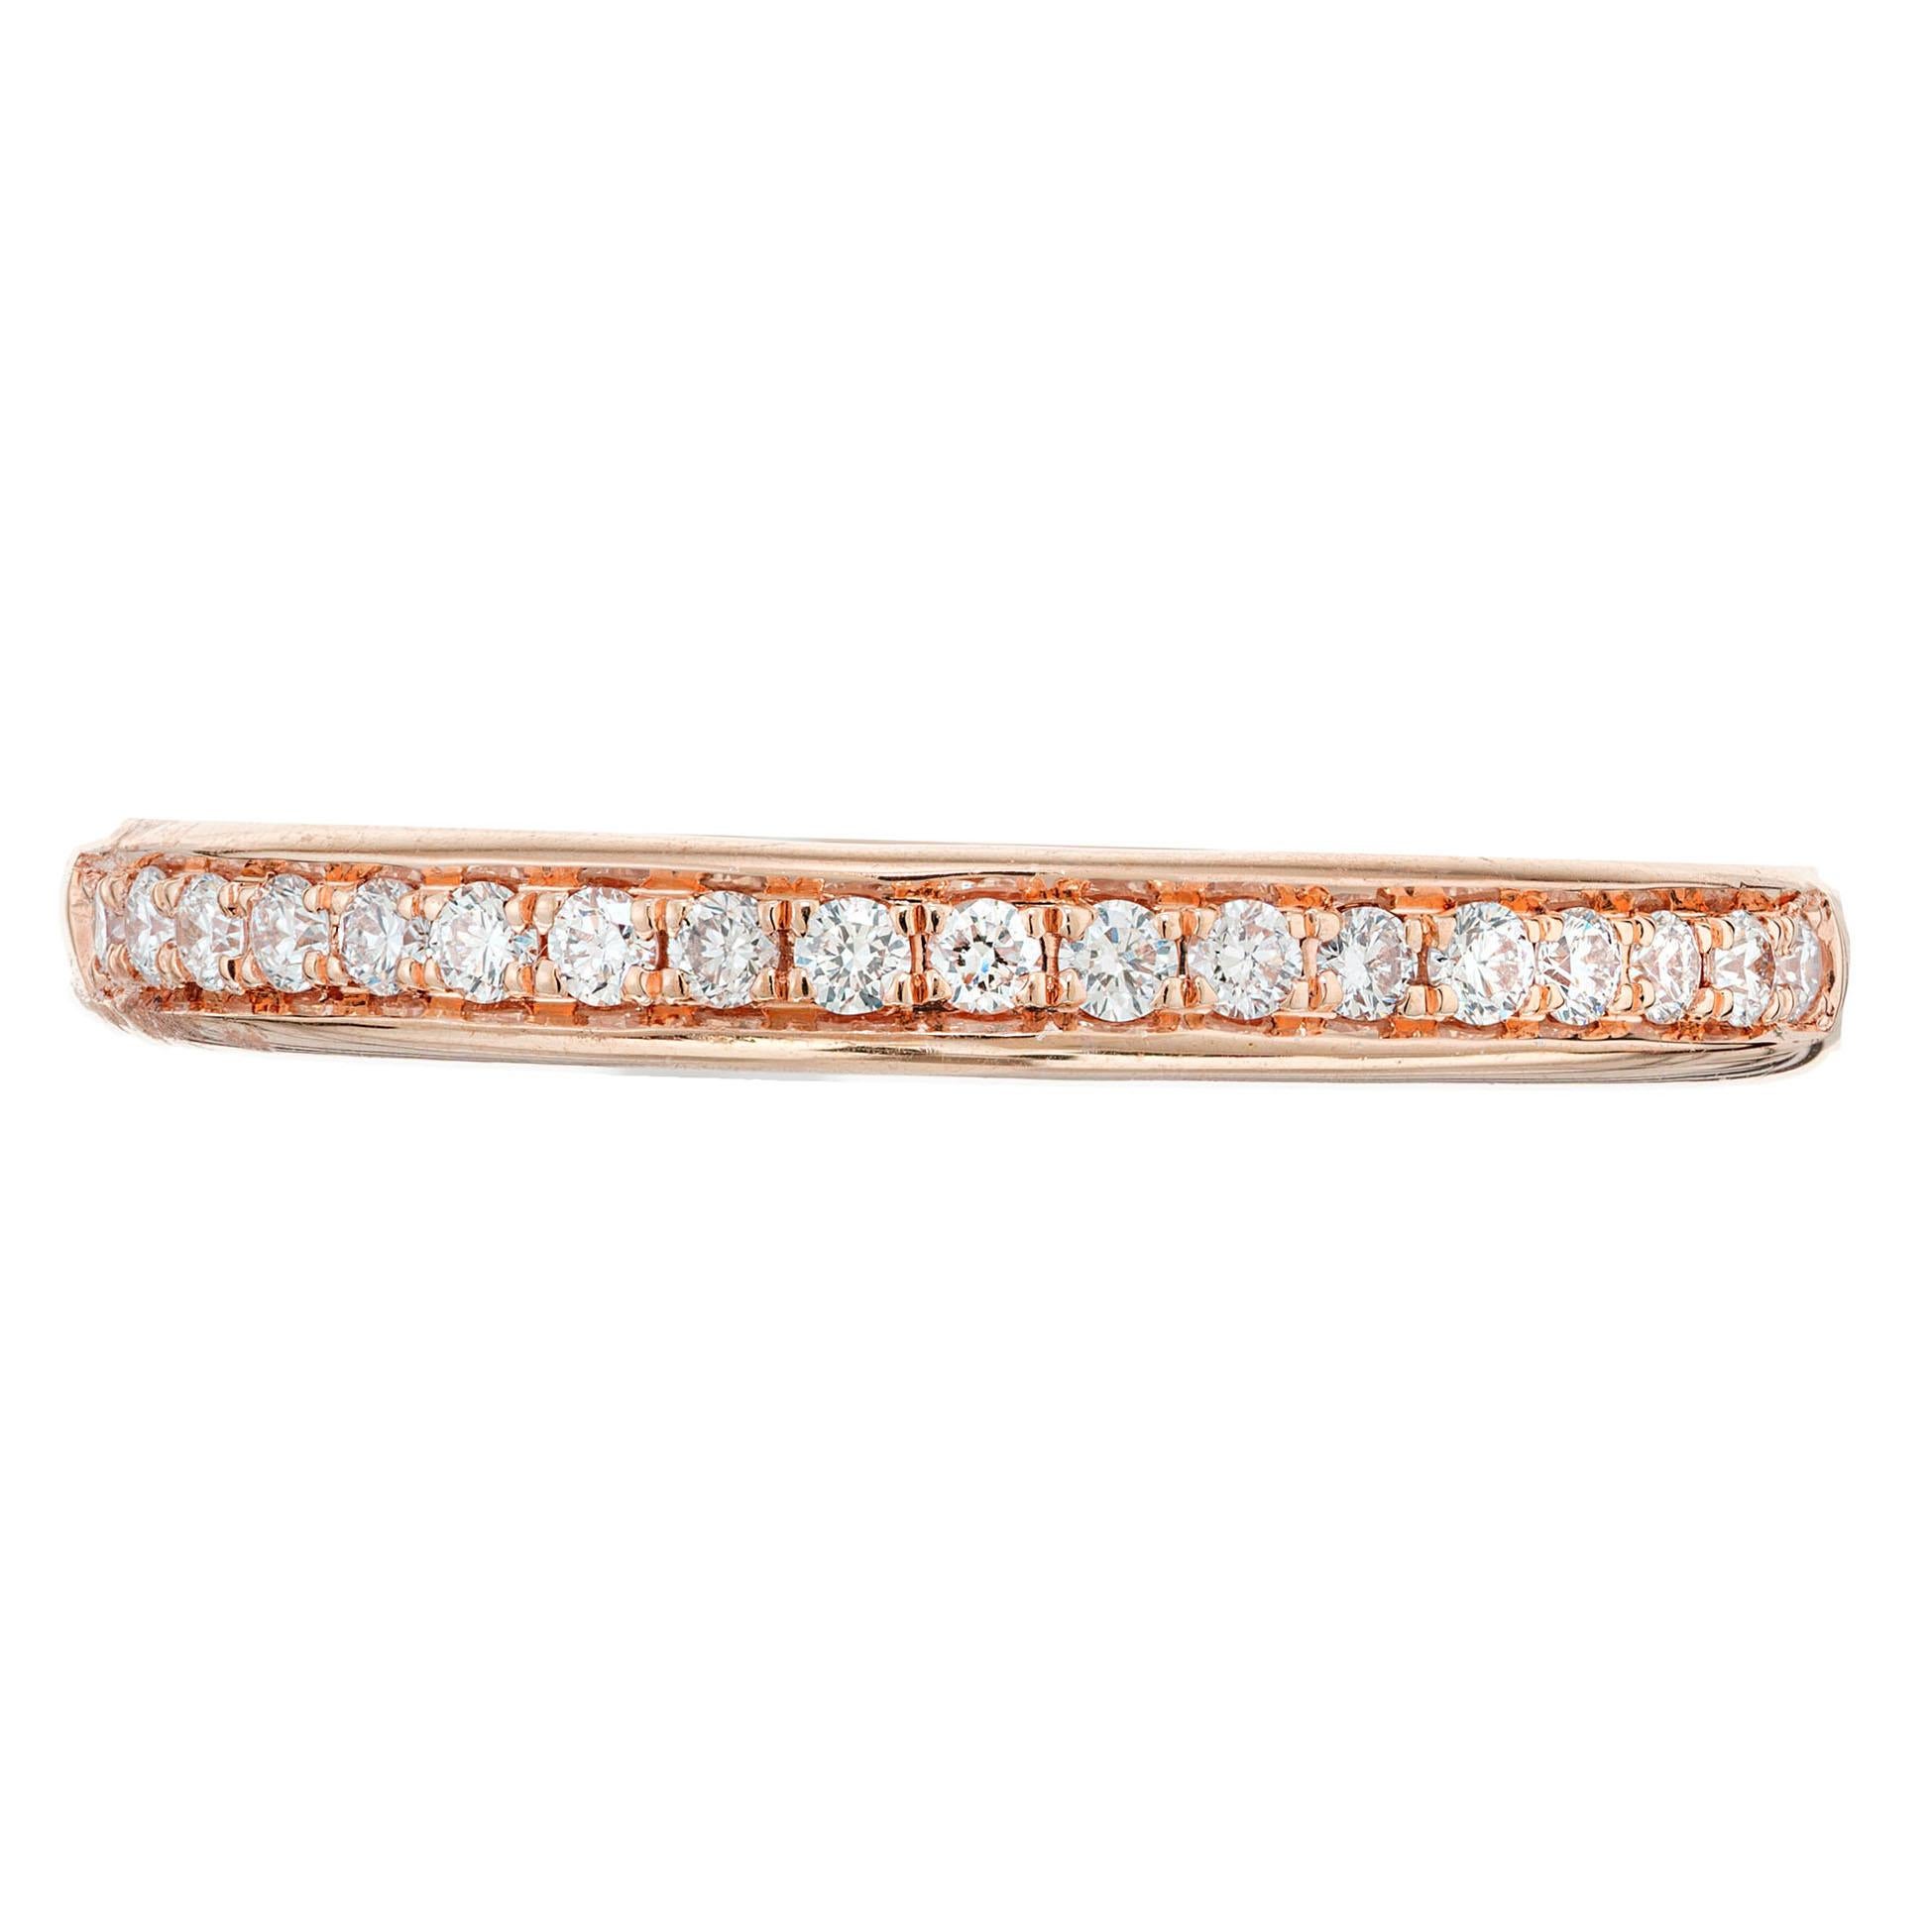 Victorian Revival diamond wedding band ring. 18 round full cut pave set diamonds in a 18k yellow gold setting. Can be made in any finger size. 

18 round full cut diamonds, approx. total weight .20cts, F, VS
18k rose gold
Tested and stamped: 18k
3.5